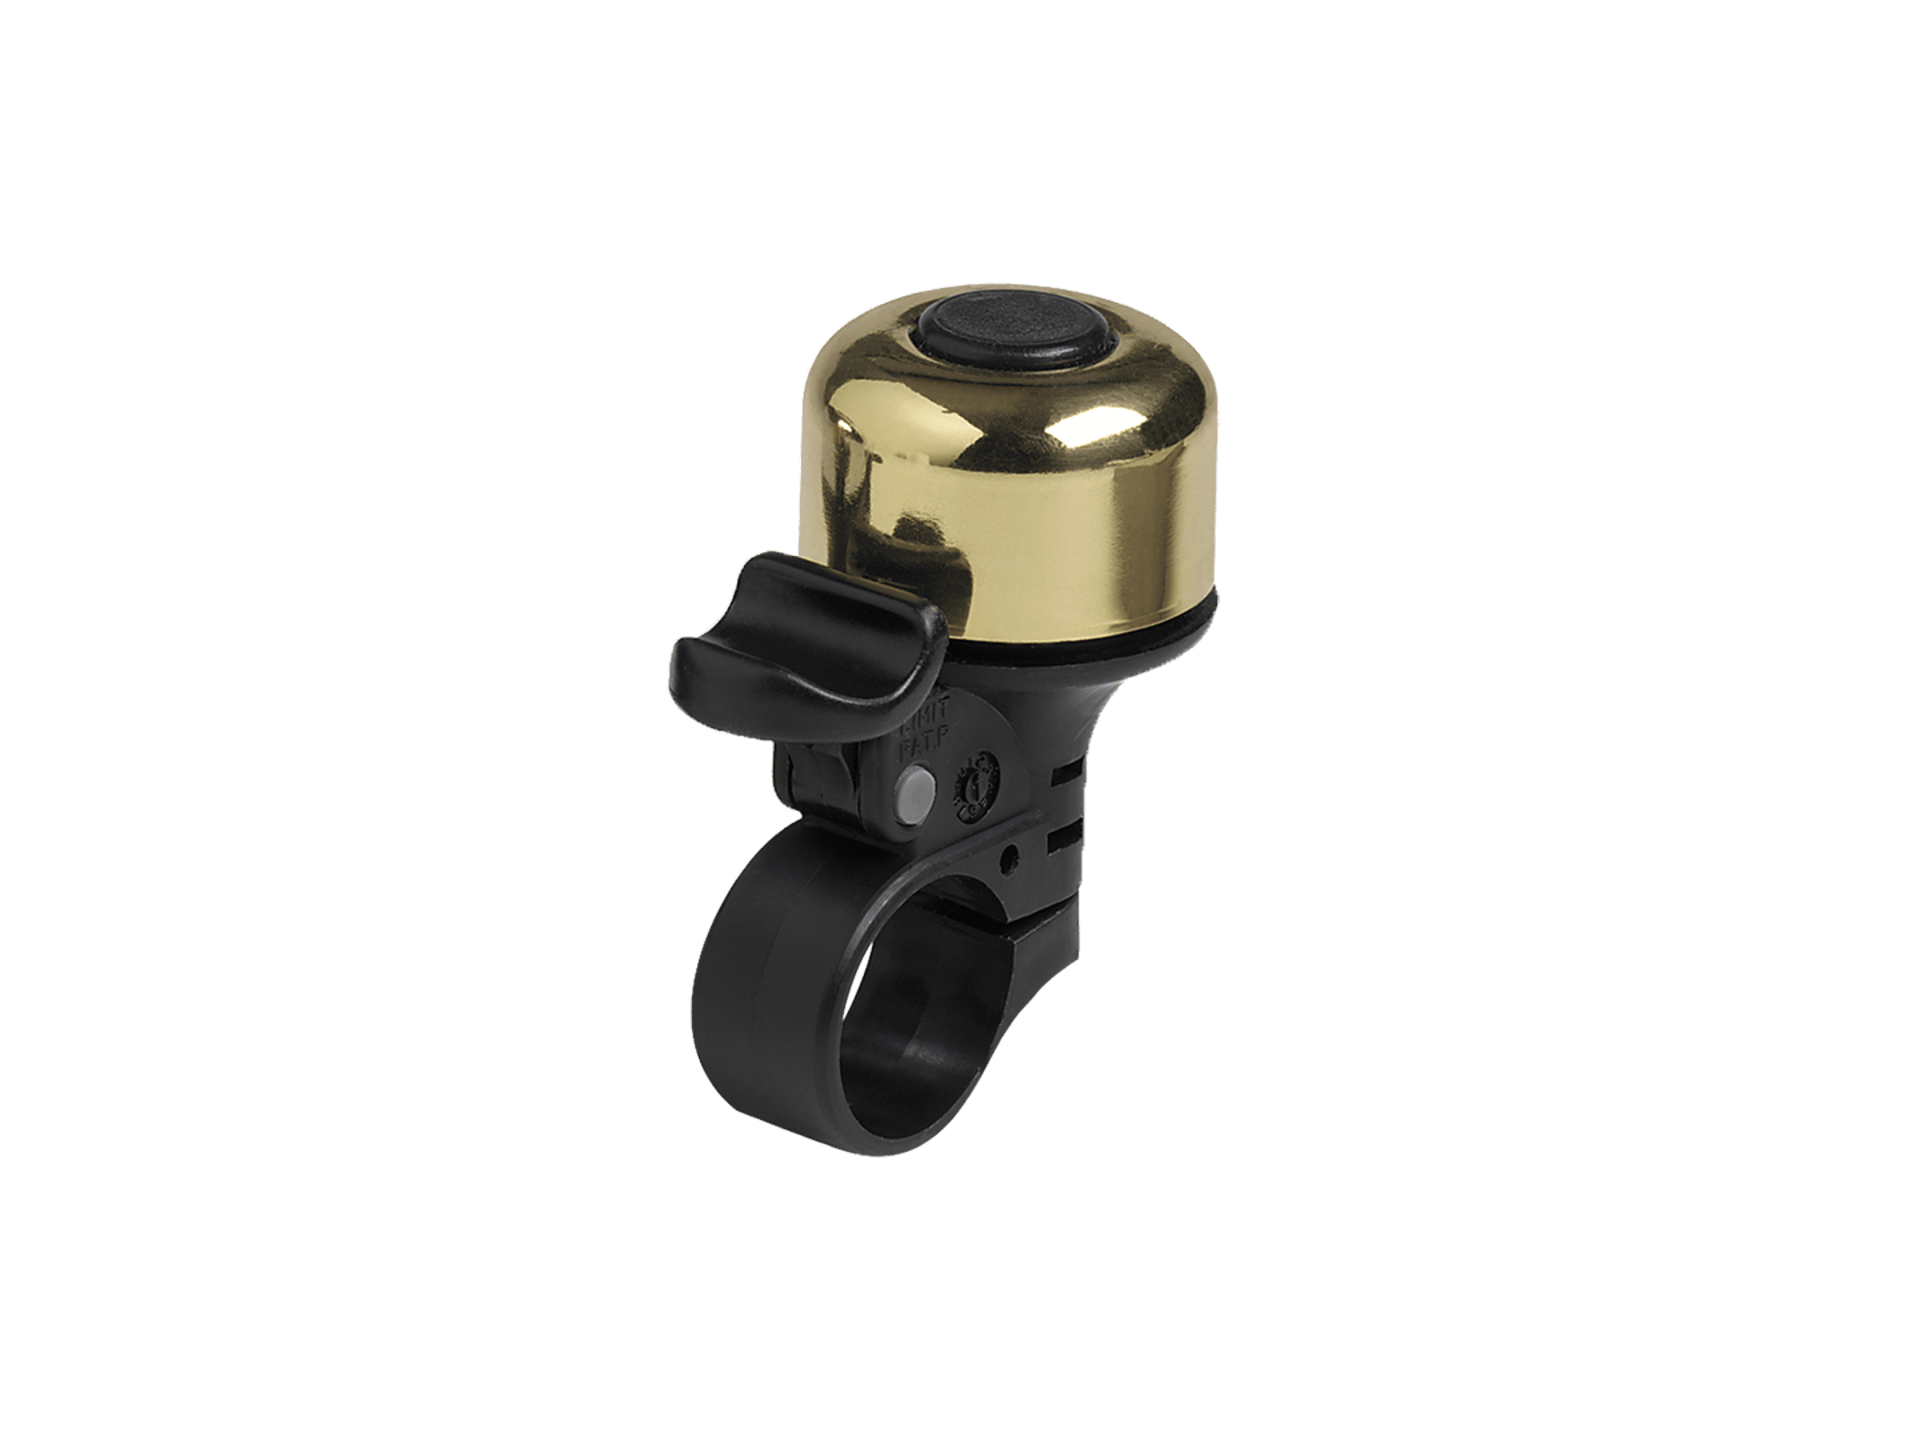 Mirrycle Incredibell Brass Solo Bike Bell